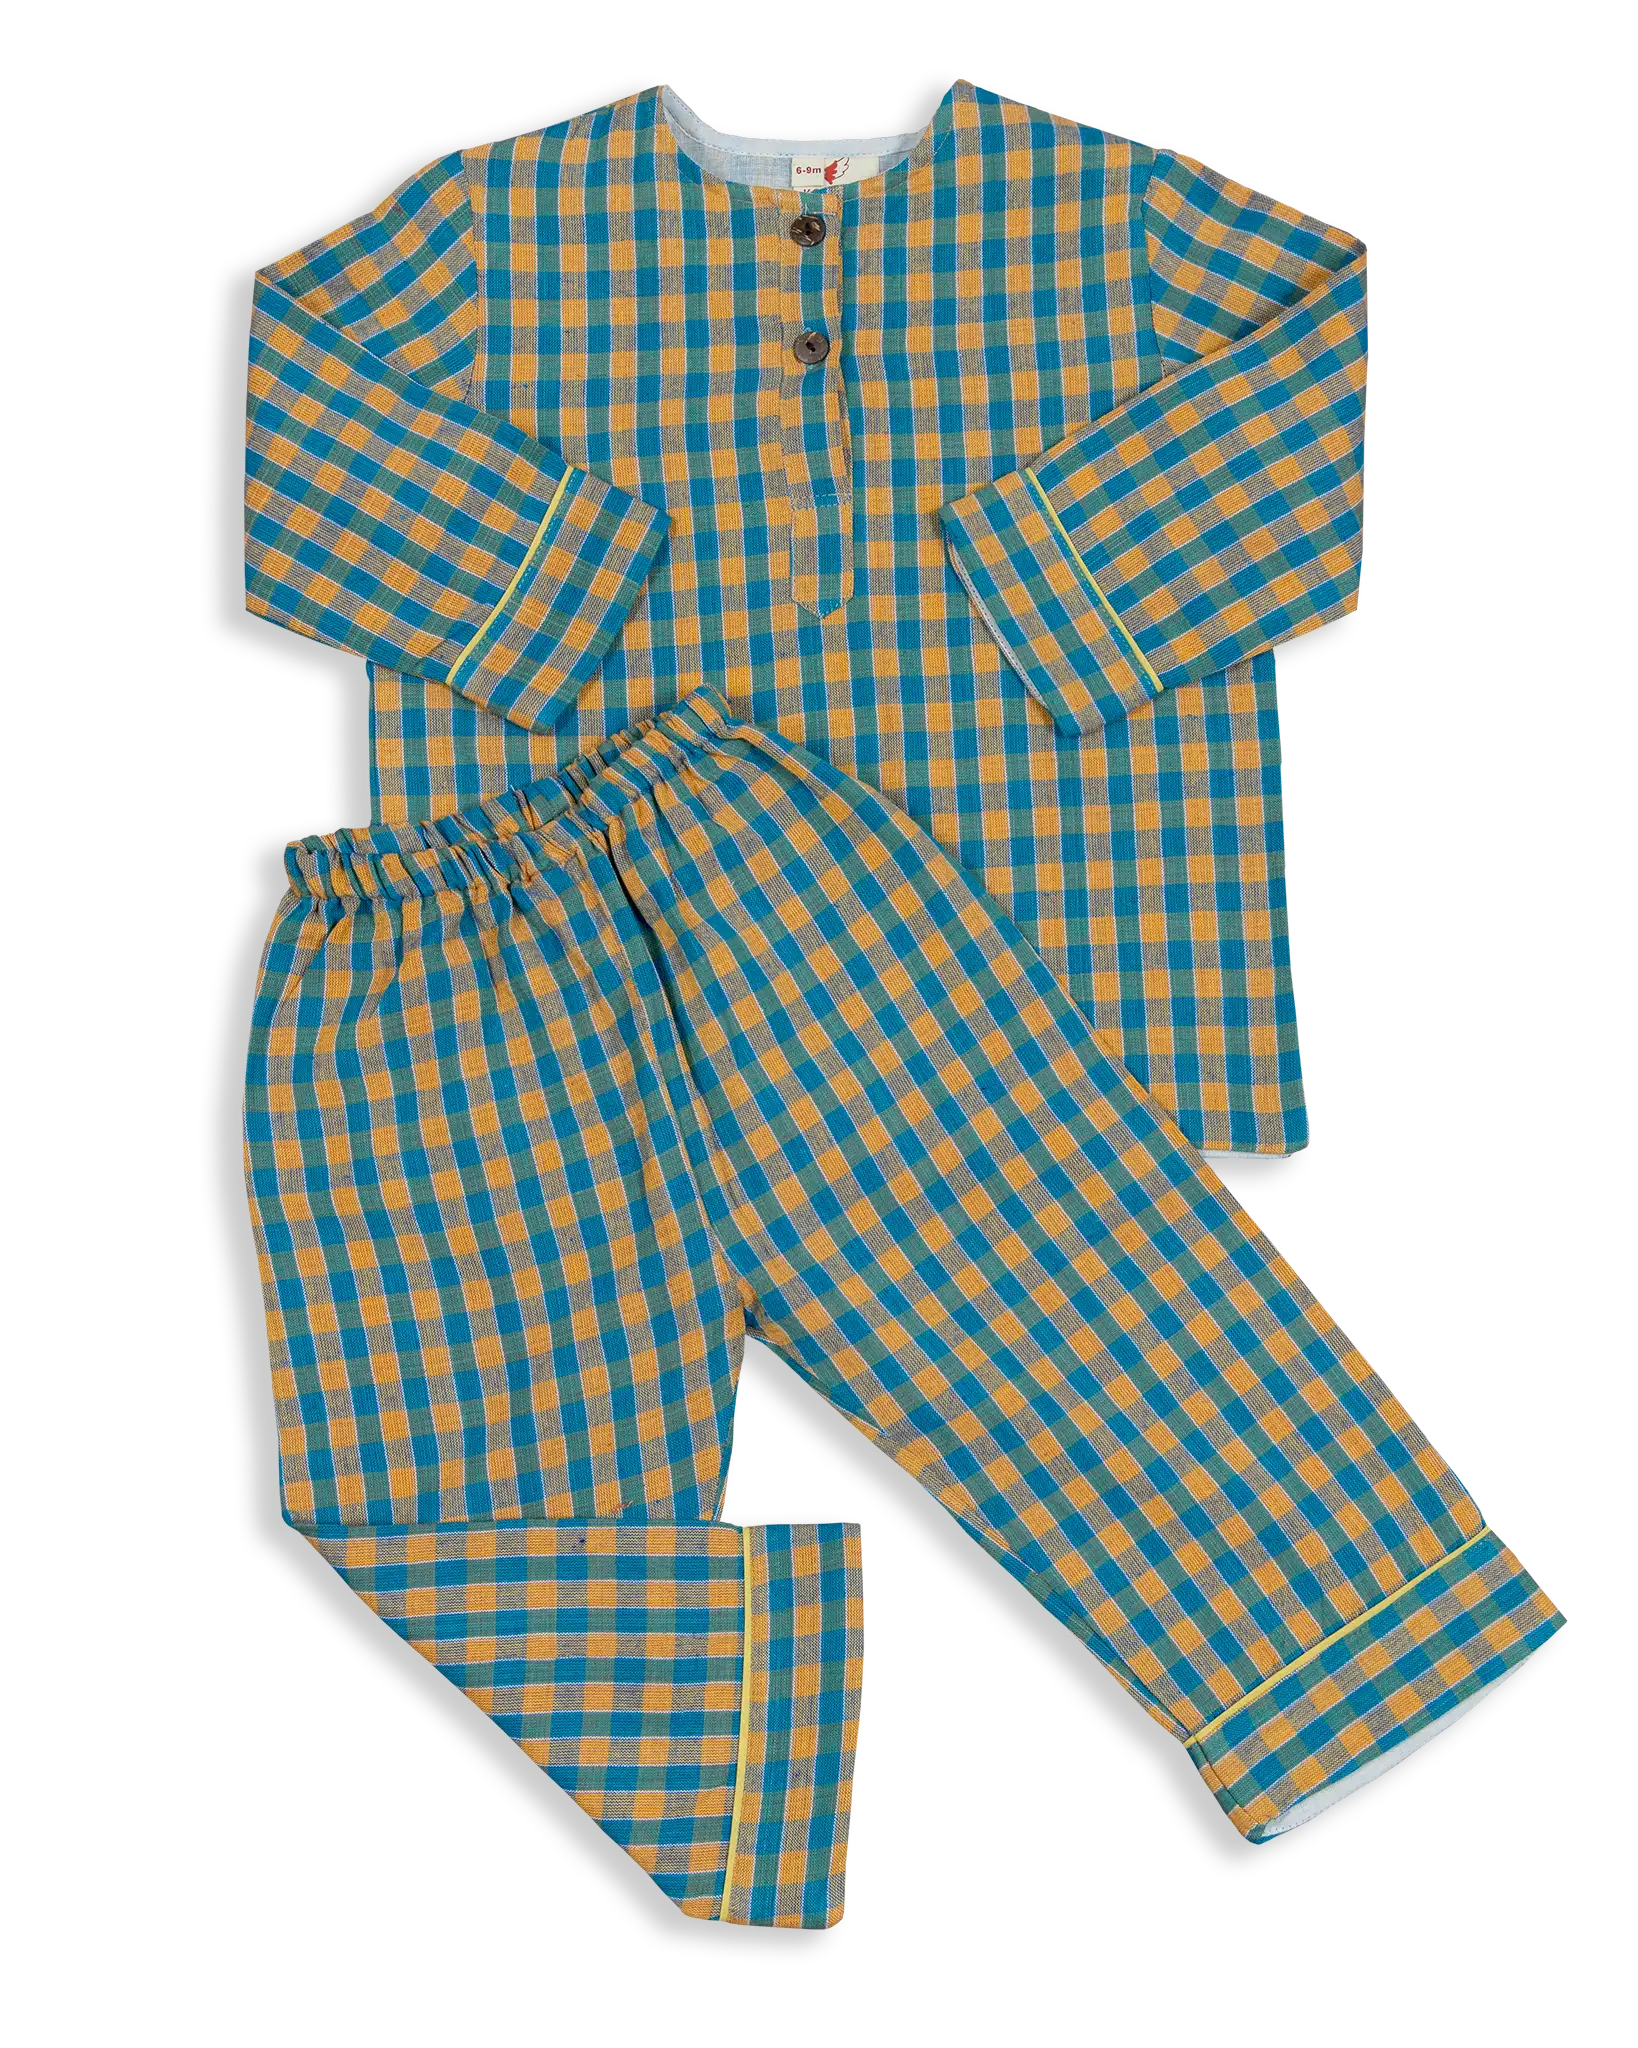 These classic cotton checkered Pyjamas are some of our best selling products. Designed and woven here in Nepal they are made with the finest voile lining. It is also known as cotton cashmere, well known and used for kids wear due to the softness and its breathable nature.